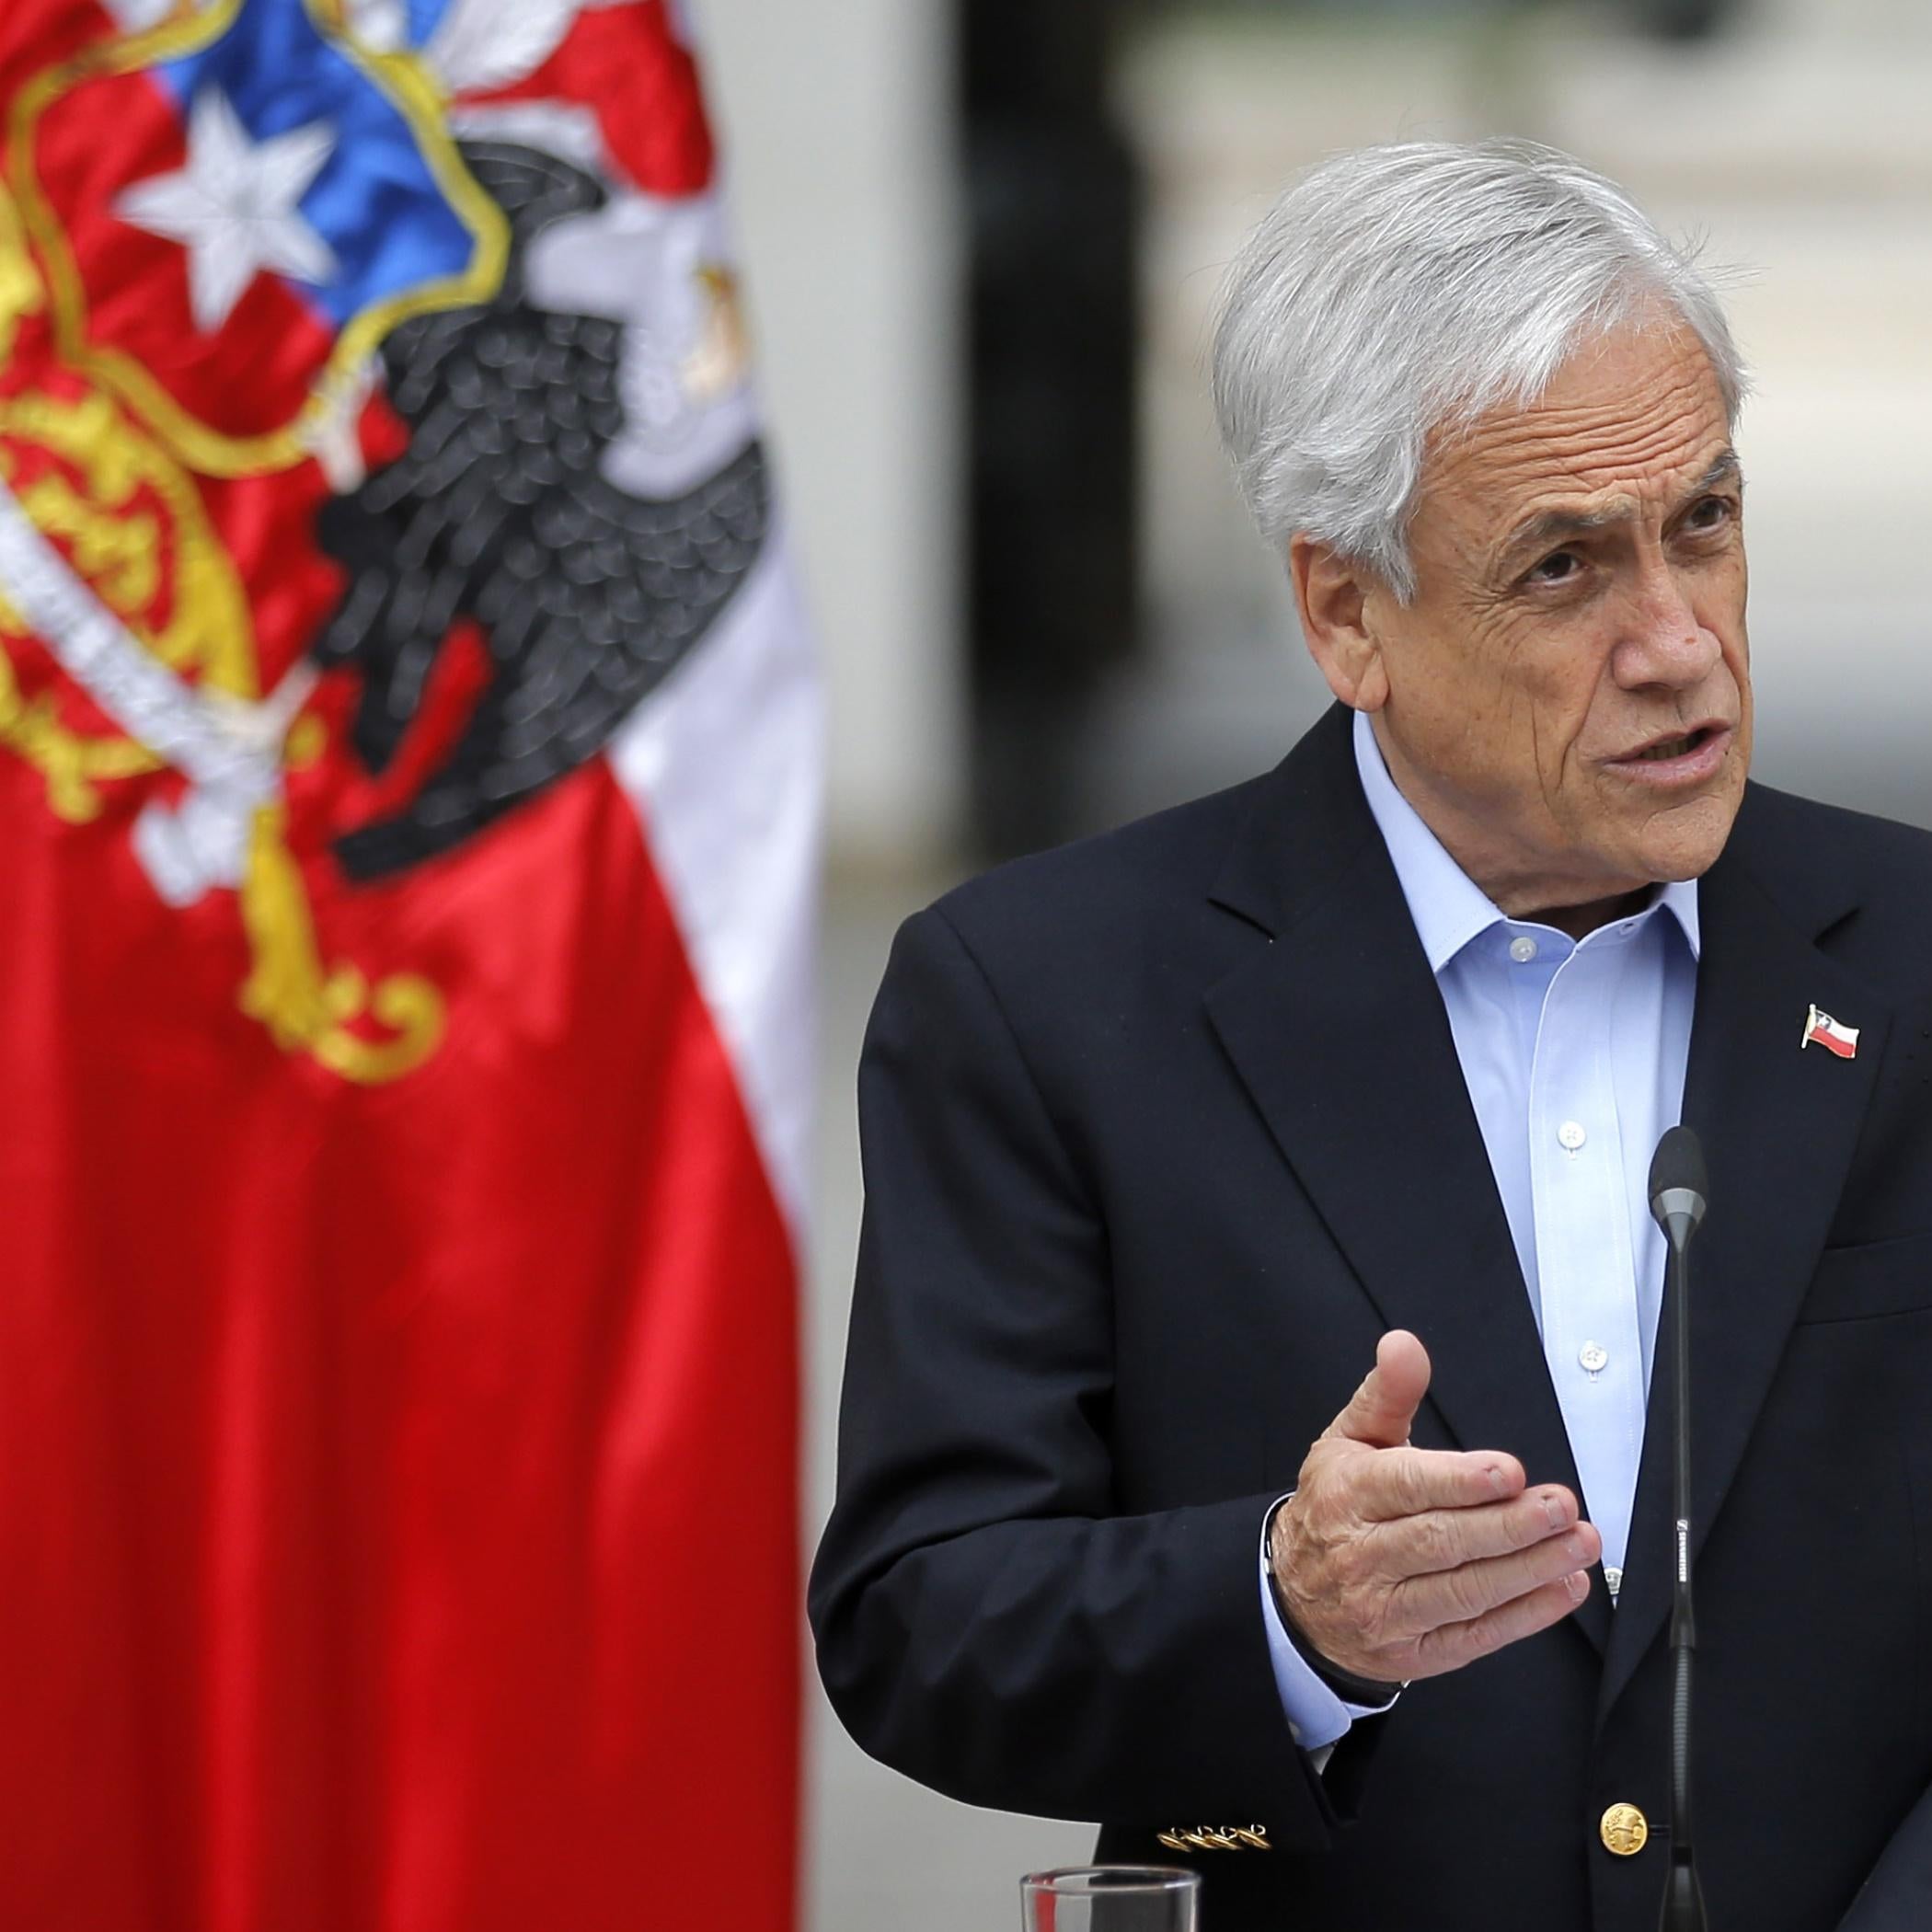 Chilean President Sebastian Pinera addresses the nation in Santiago, on October 26, 2019. - A nighttime curfew in the Chilean capital Santiago was lifted by the military on Saturday after a week of deadly demonstrations demanding economic reforms and the resignation of President Sebastian Pinera. (Photo by Pedro Lopez / AFP) (Photo by PEDRO LOPEZ/AFP via Getty Images)